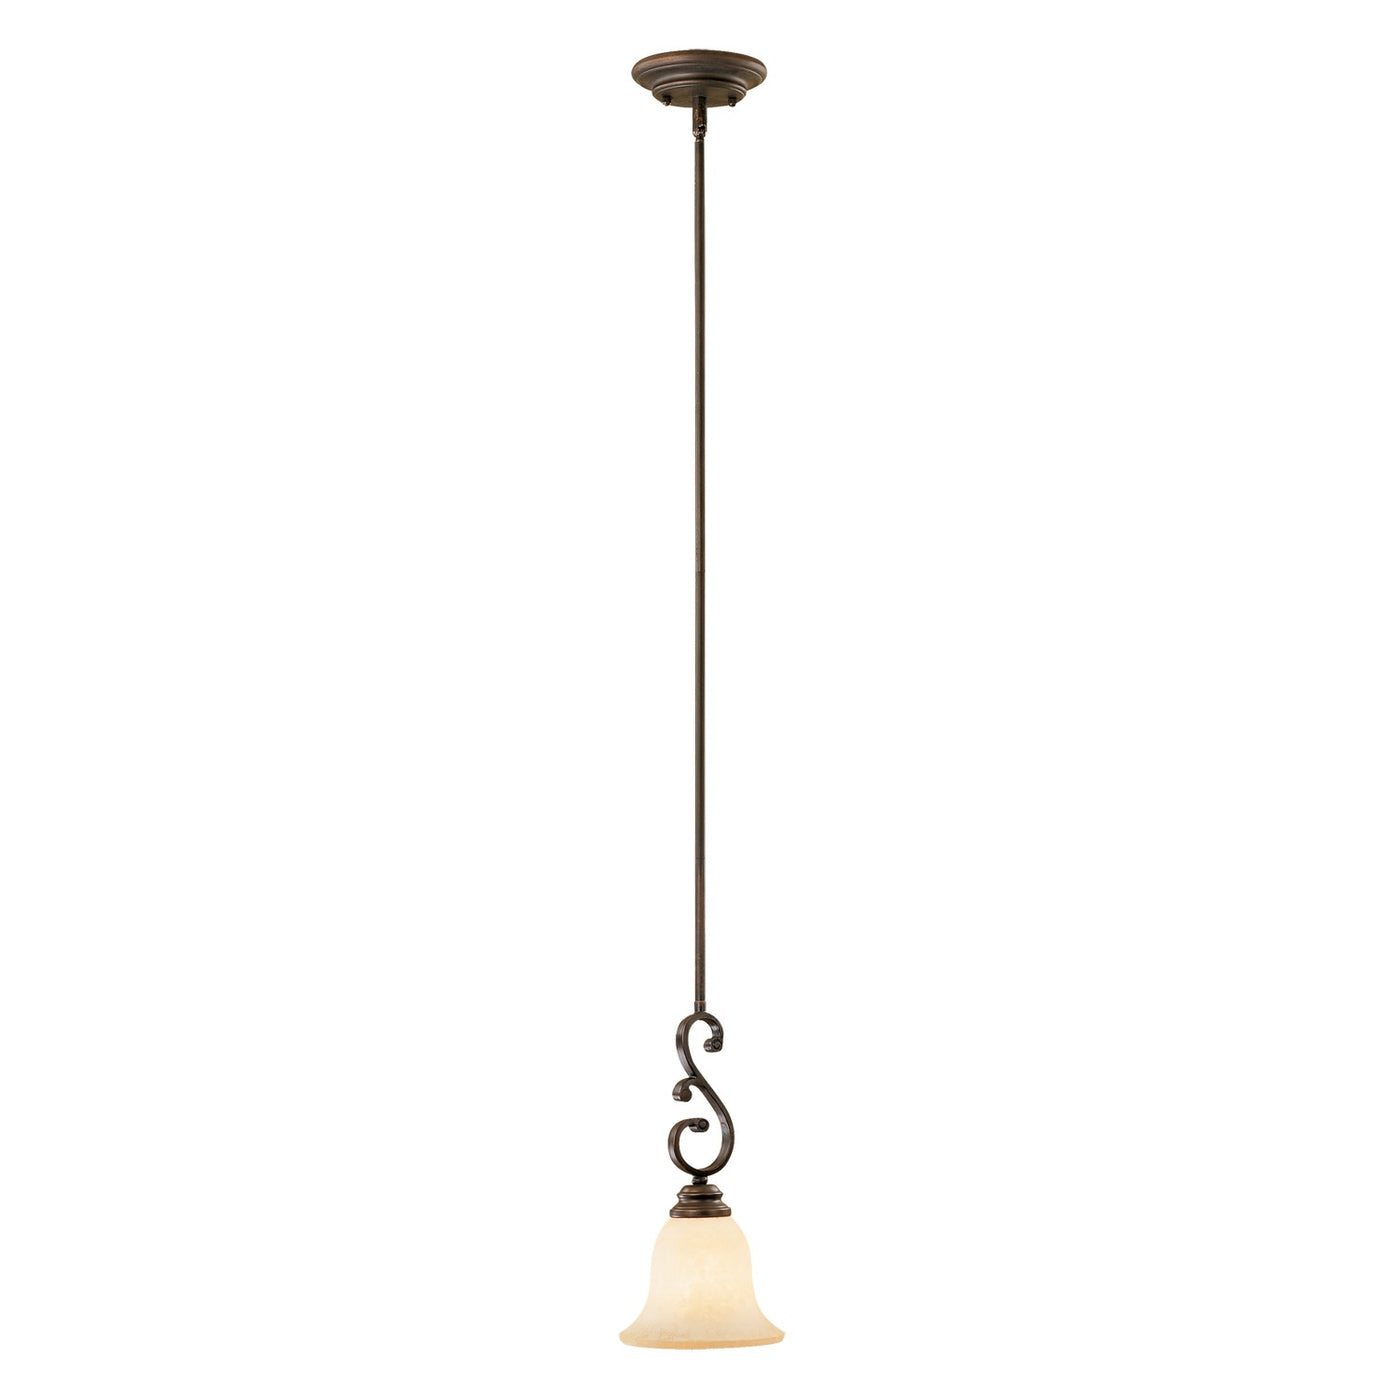 Millennium Lightings Oxford Mini-Pendant Offered in Rubbed Bronze finish, Item Number 1201-RBZ